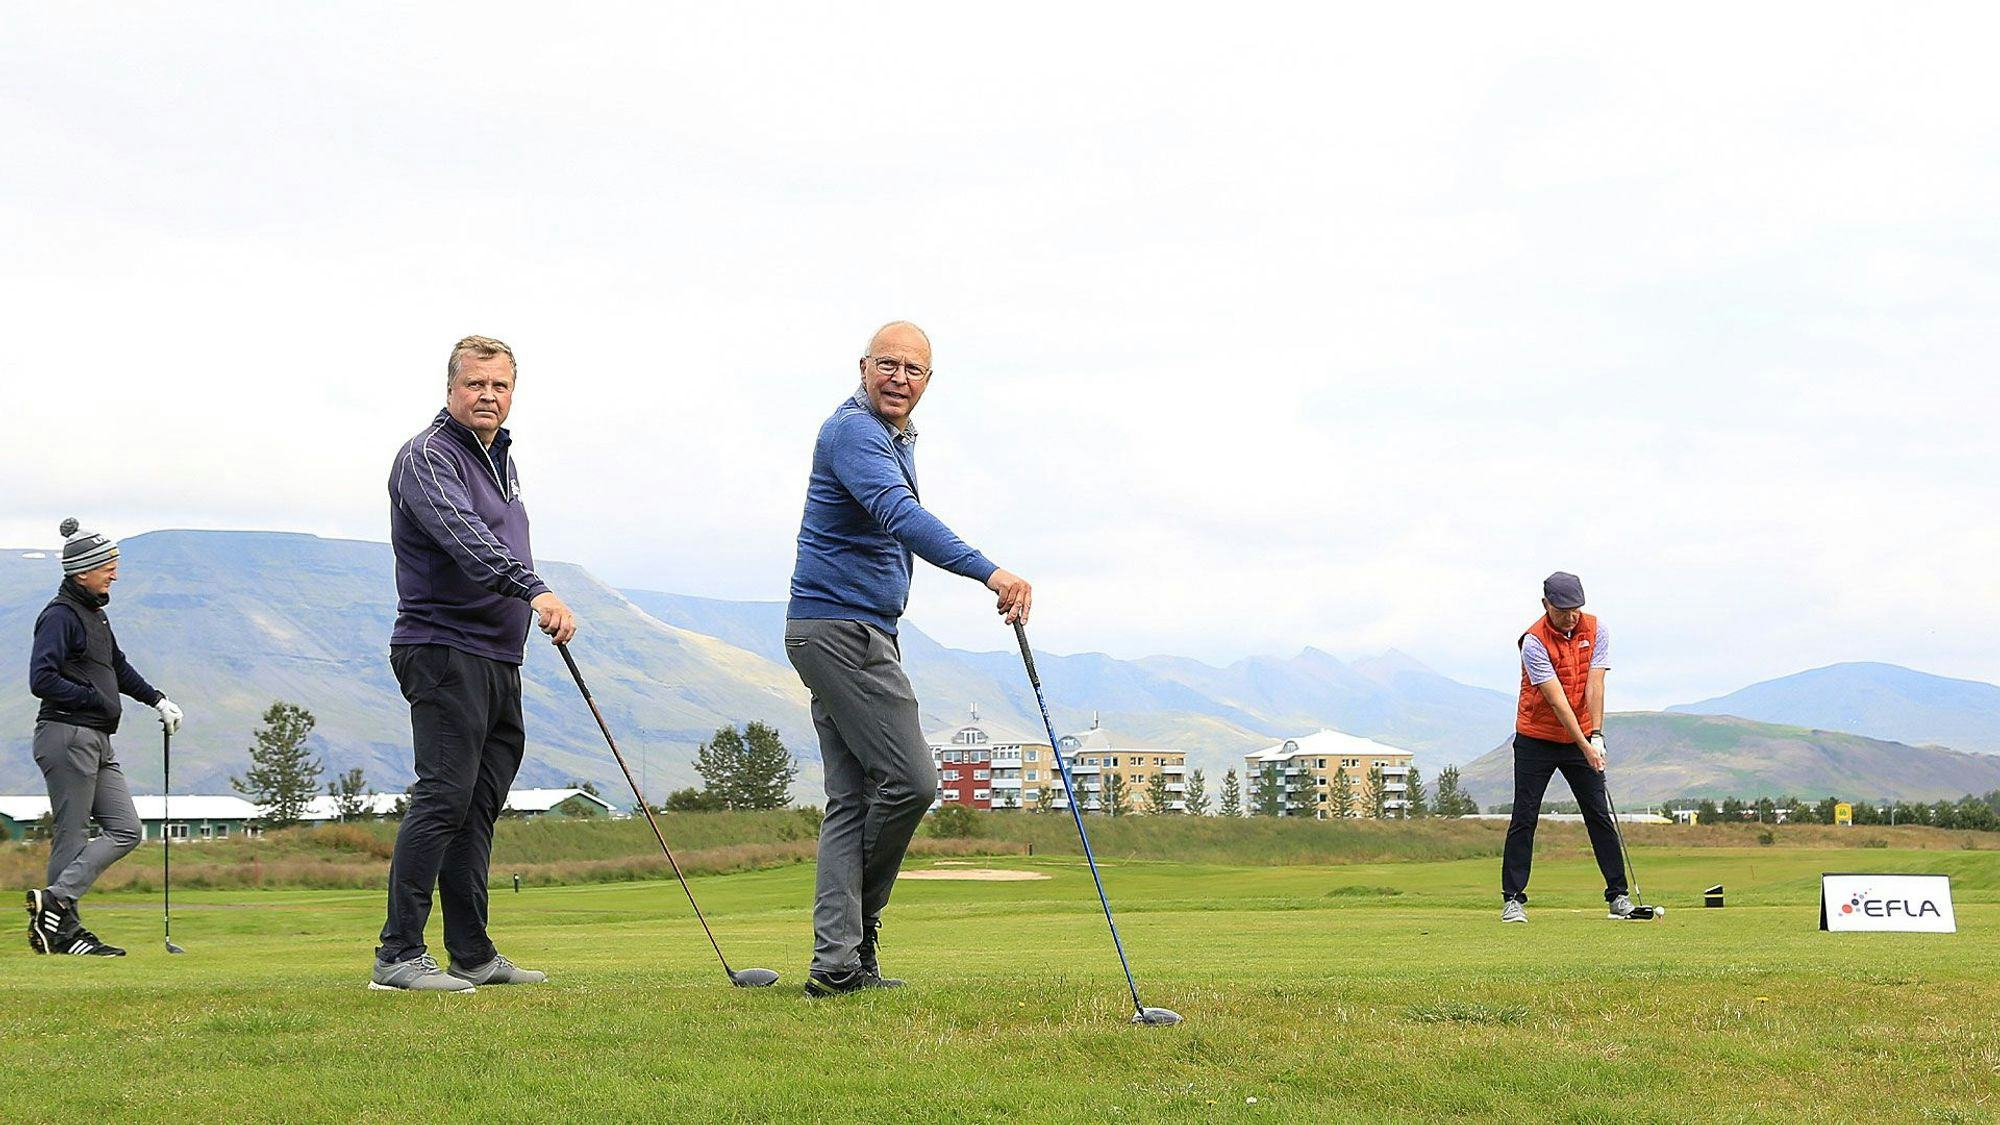 Three men on a golf course, two of them are posing with their clubs and the third one in mid-swing, against a background of mountains and buildings